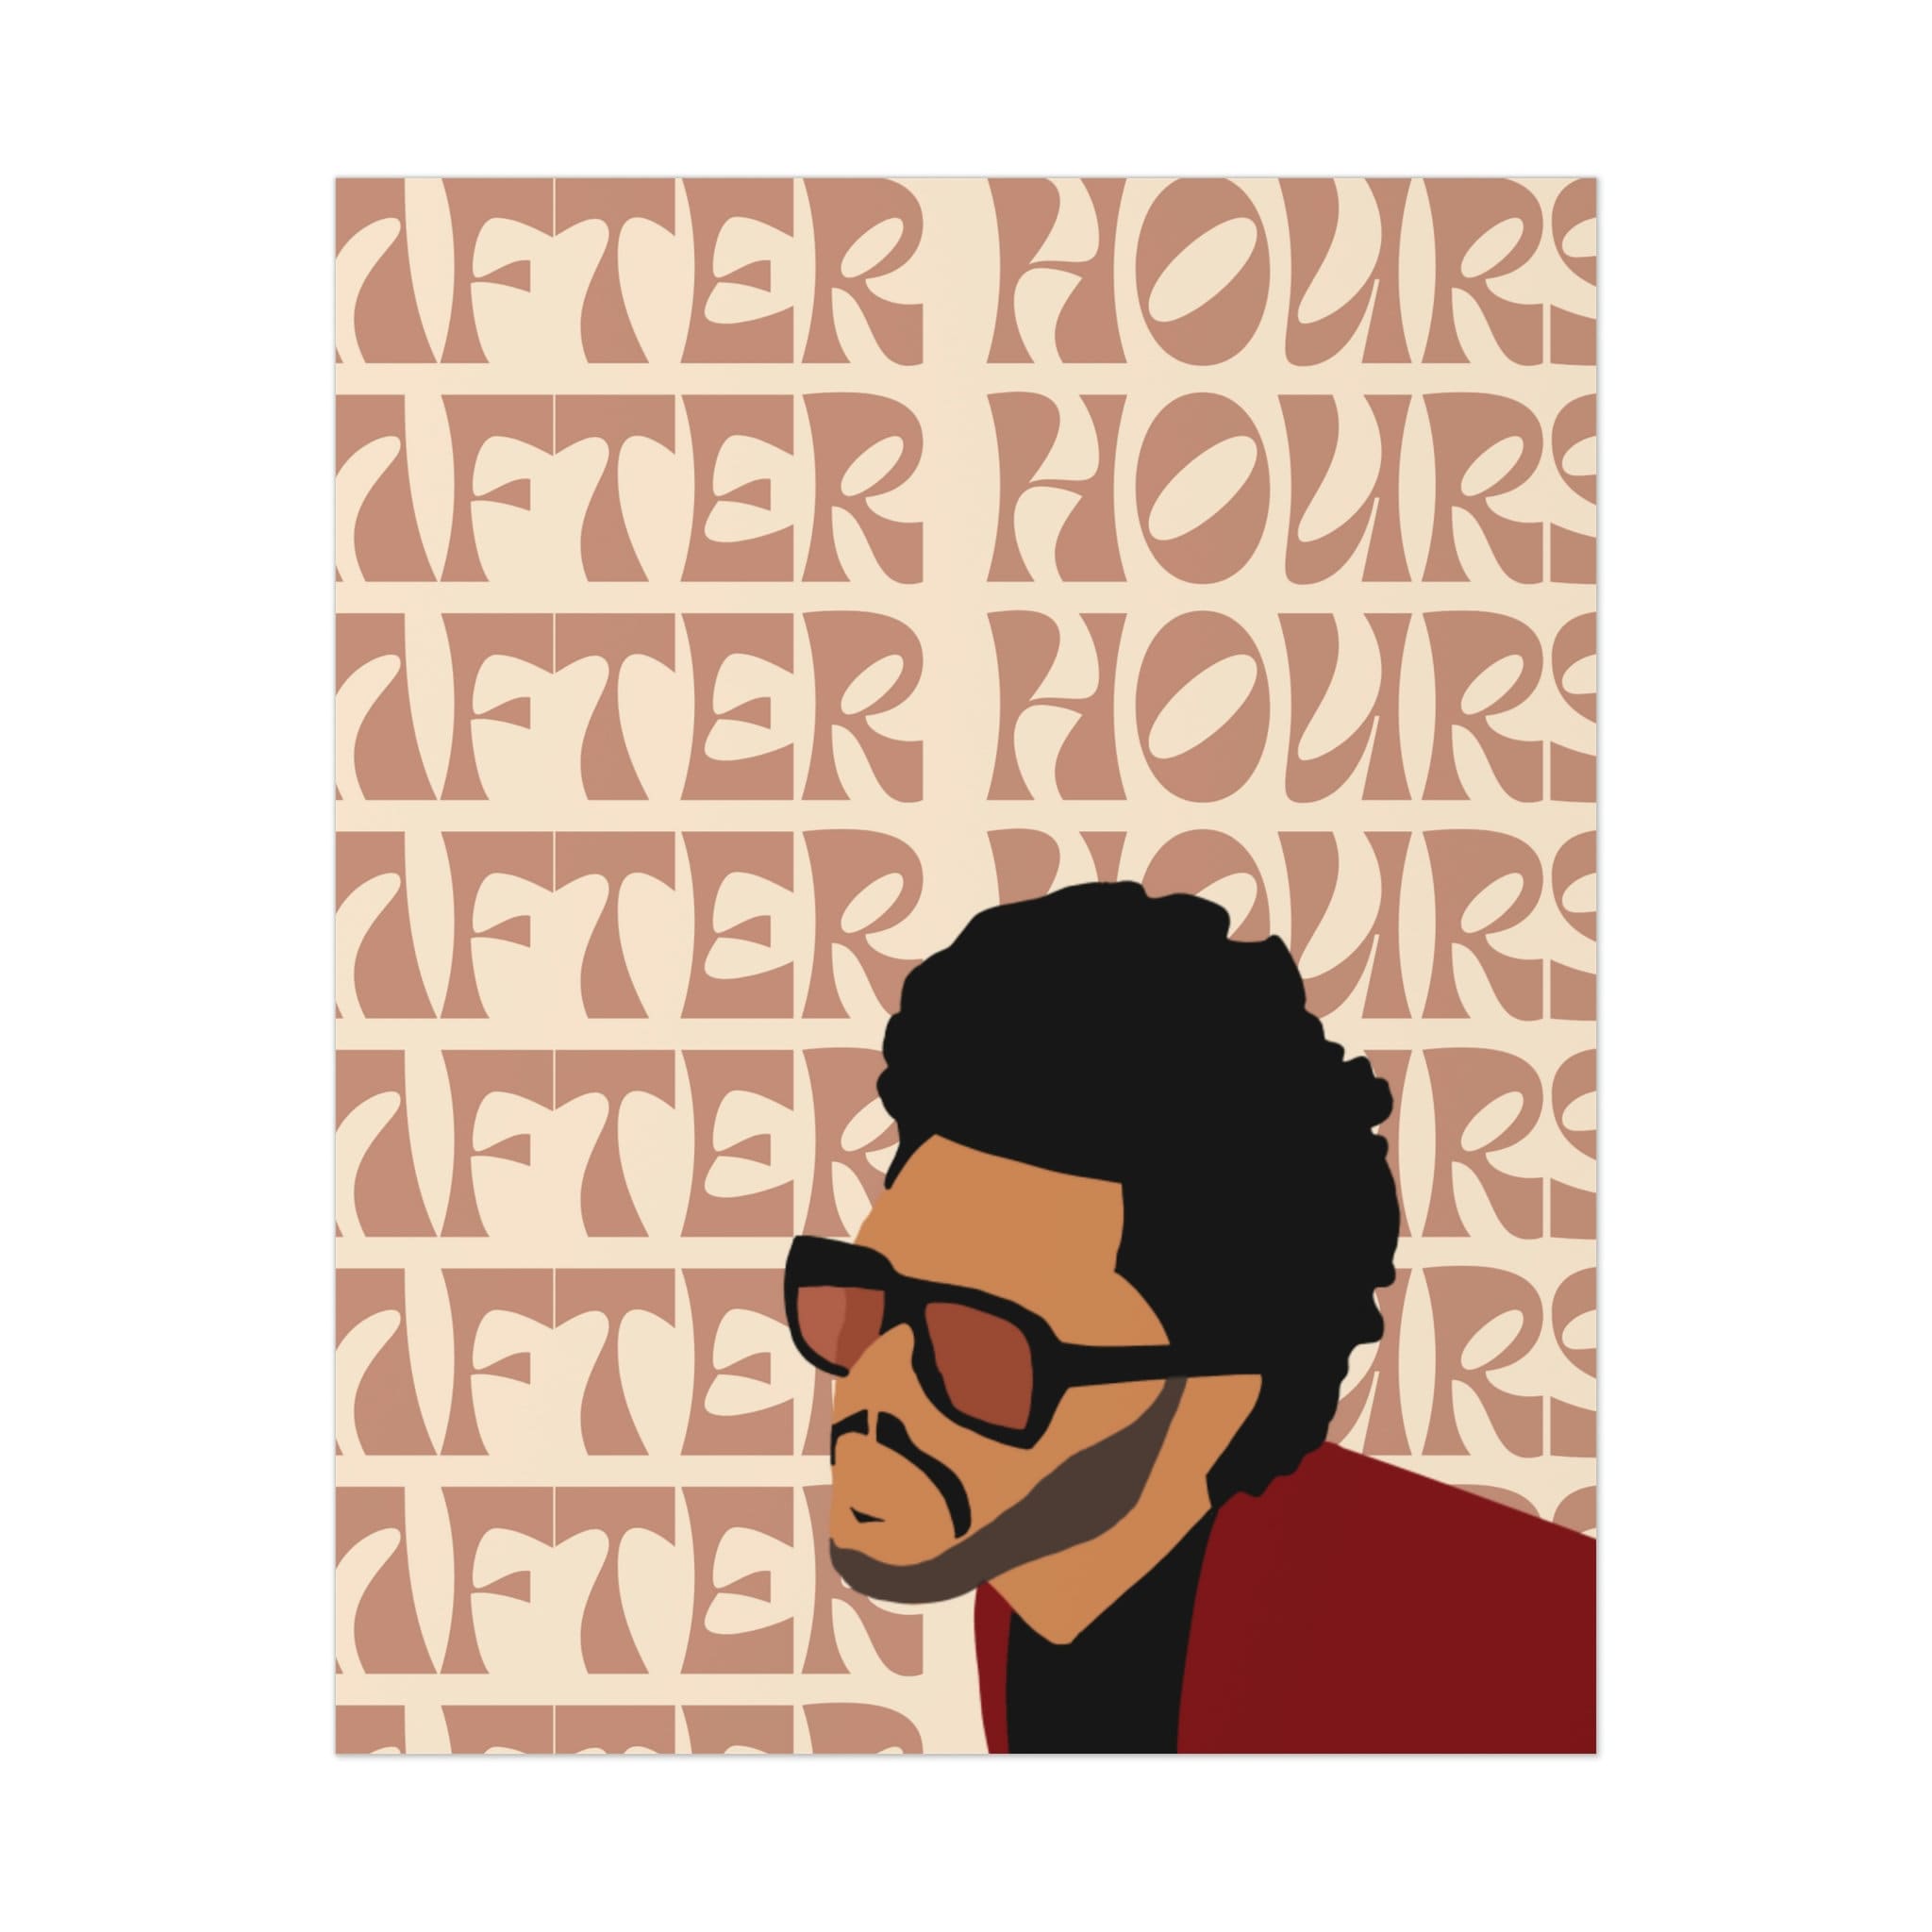 The Weeknd Poster After Hours Poster Album Cover Posters for Room Decor